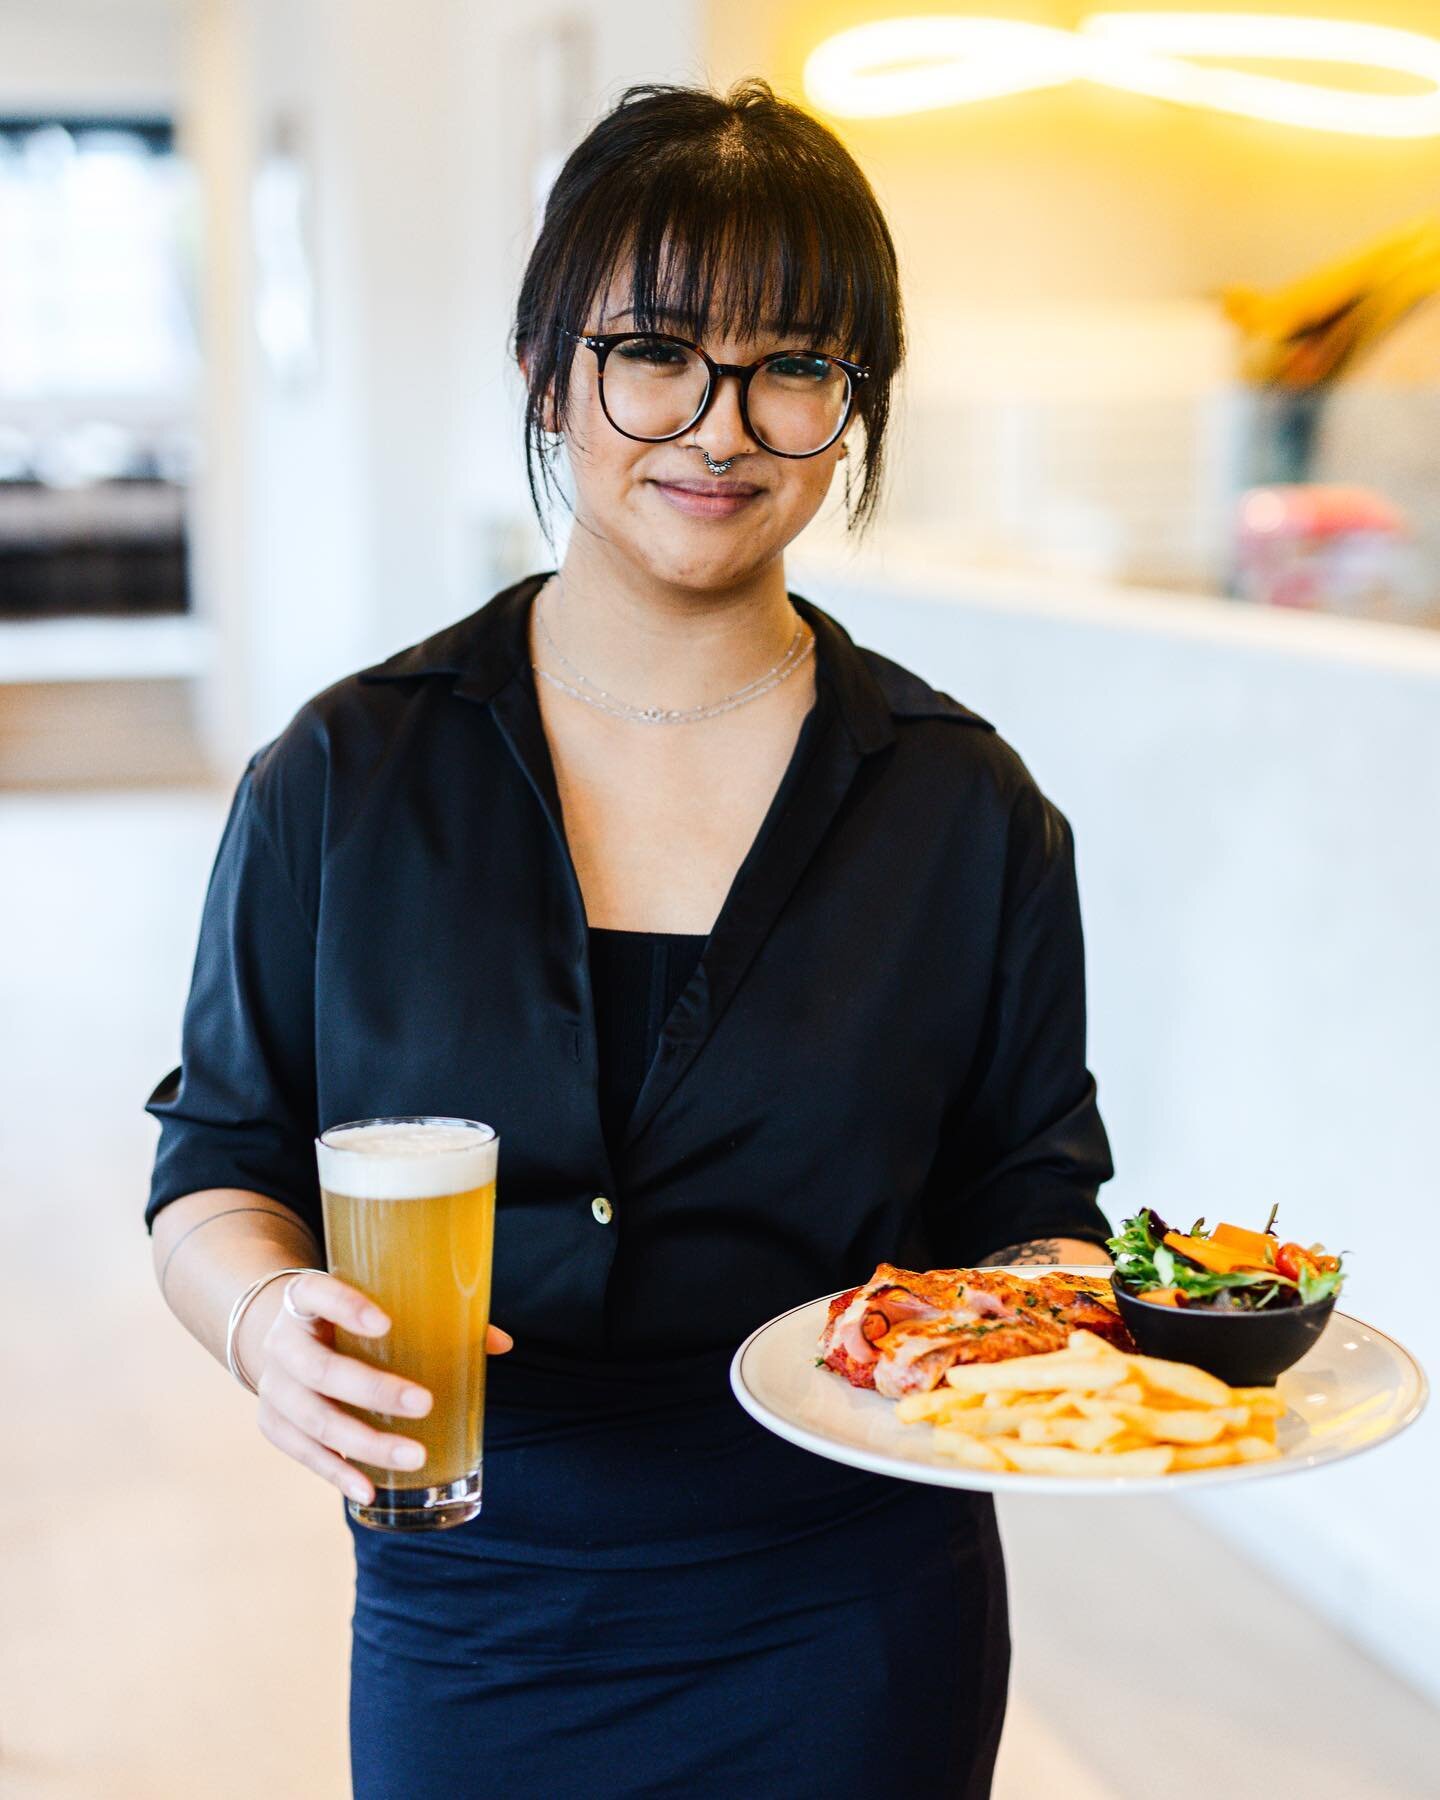 Take the thinking out of your Wednesday dinner, head down @catalinawantirna for our $18 Parma night, which includes chips &amp; salad. 

Book ahead to reserve your seat

Don't forget it's all night HAPPY HOUR!

$5 Tap Beers
$5 House Wines
$10 Spritz 